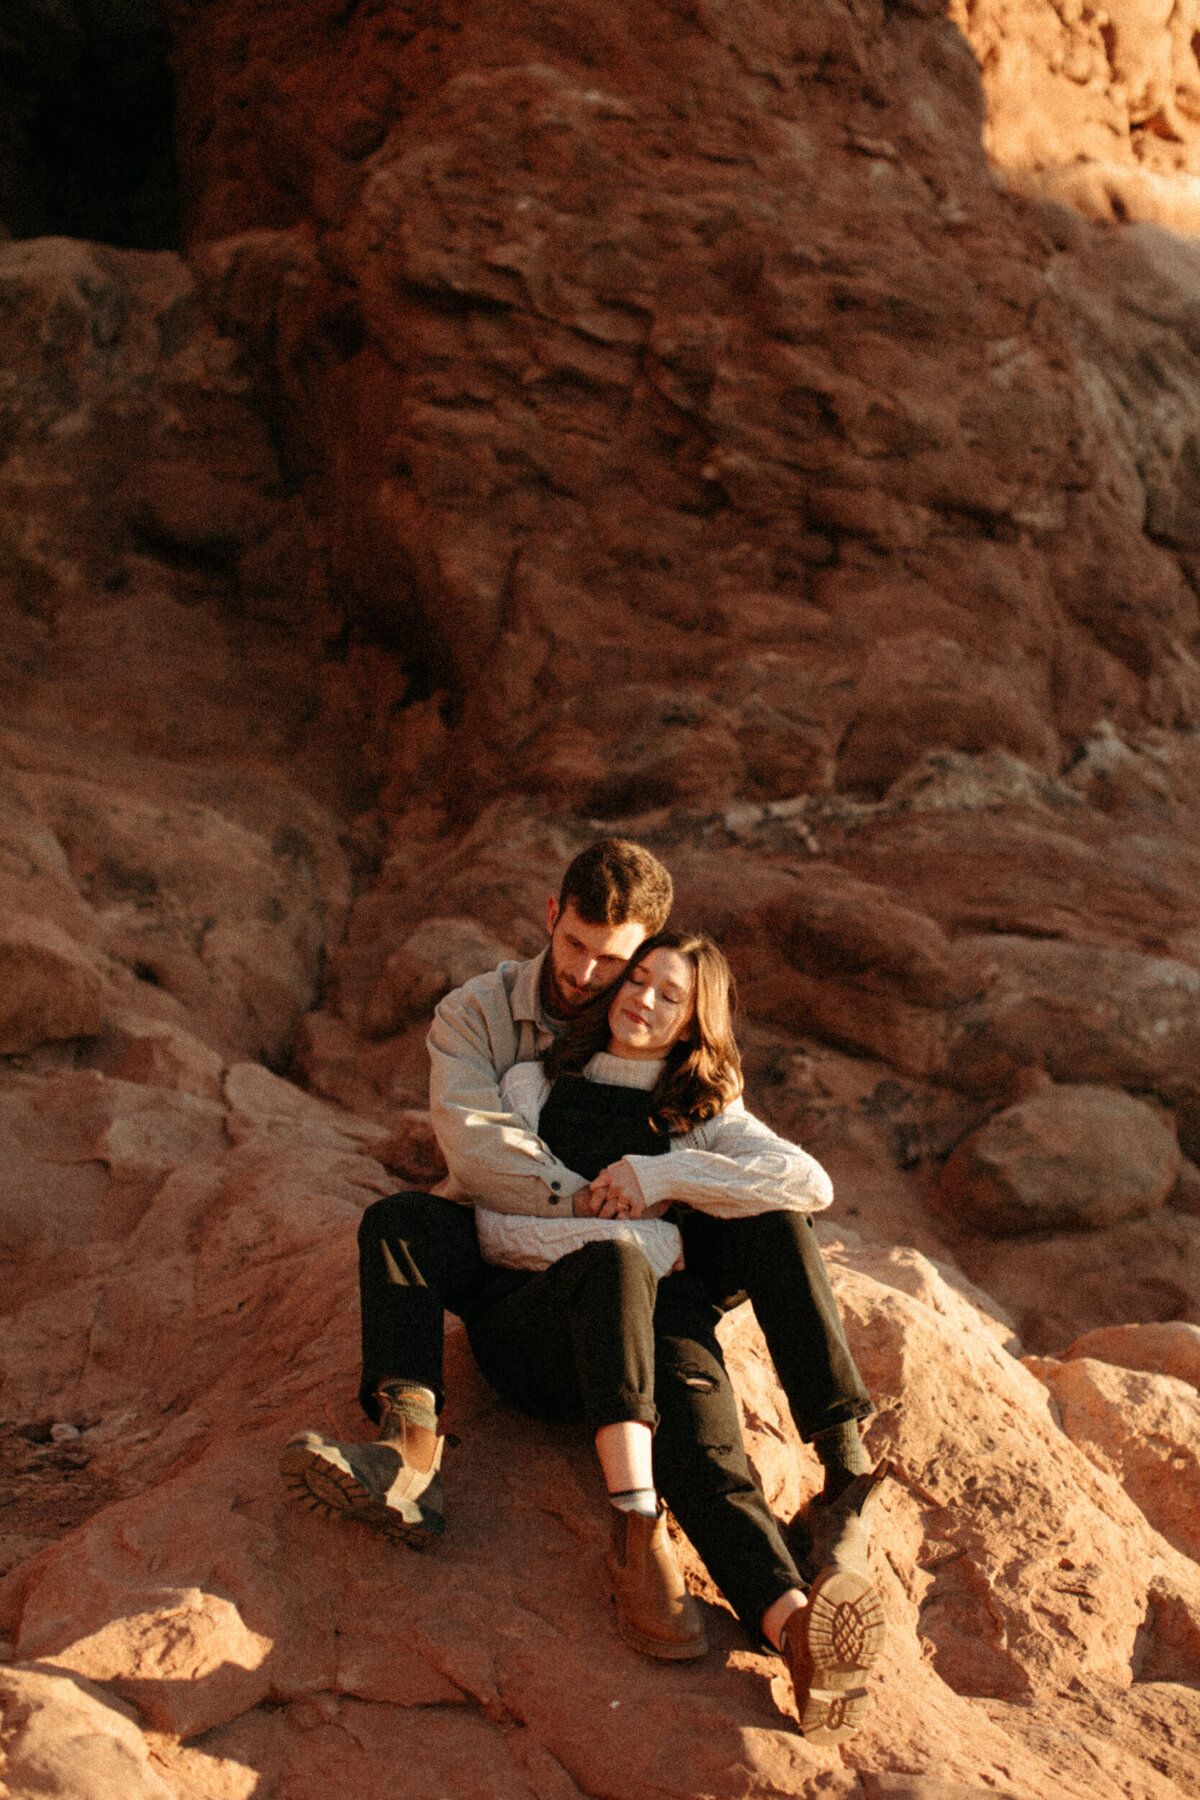 Couple snuggling together on a rock in the desert